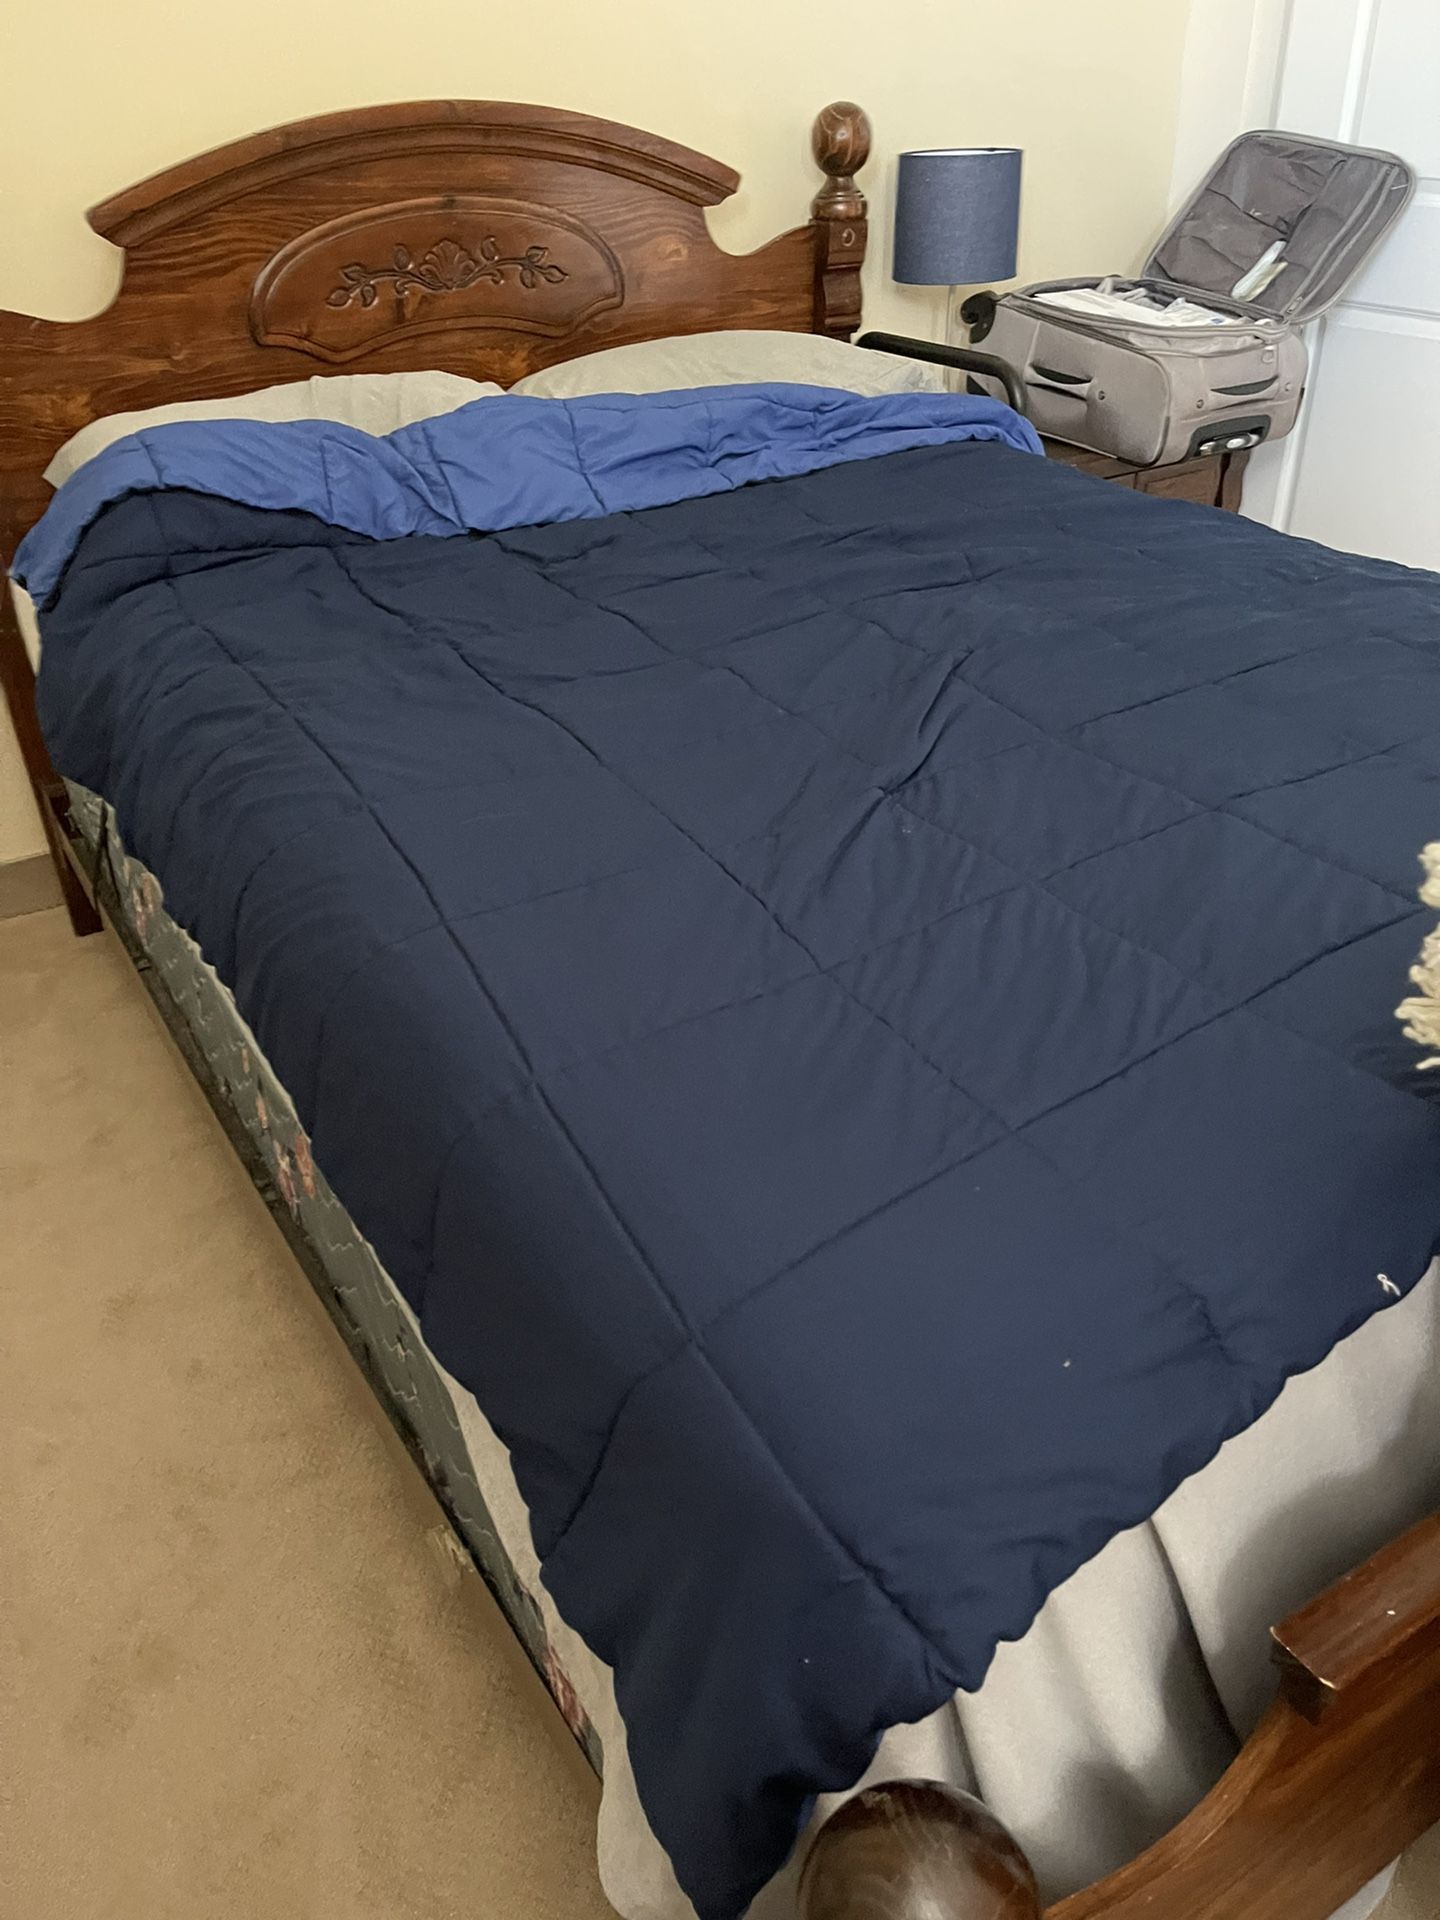 Free Bed And Bedding (Queen)